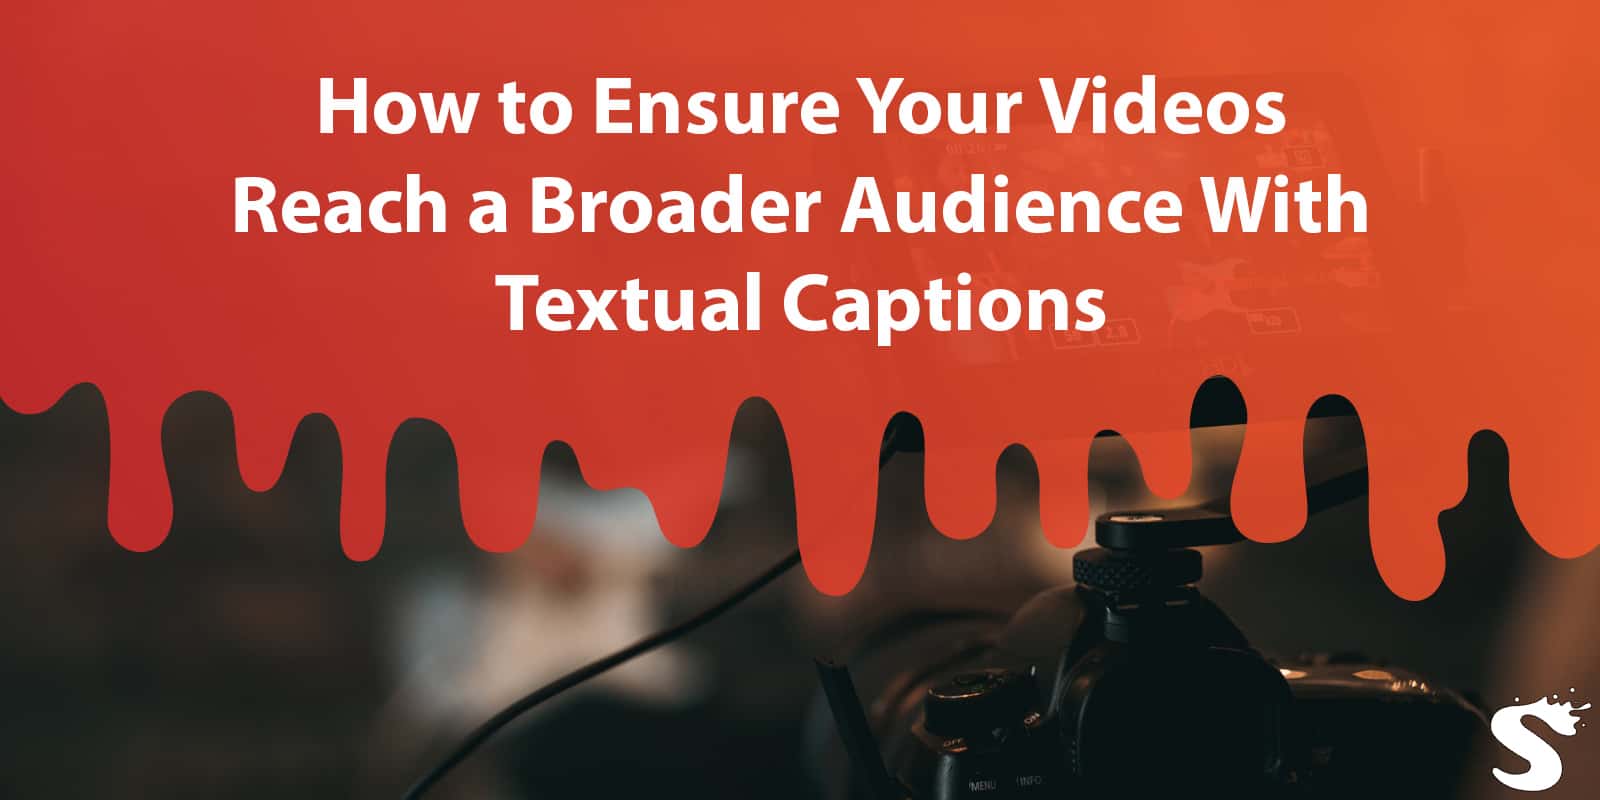 How to Ensure Your Videos Reach a Broader Audience With Textual Captions